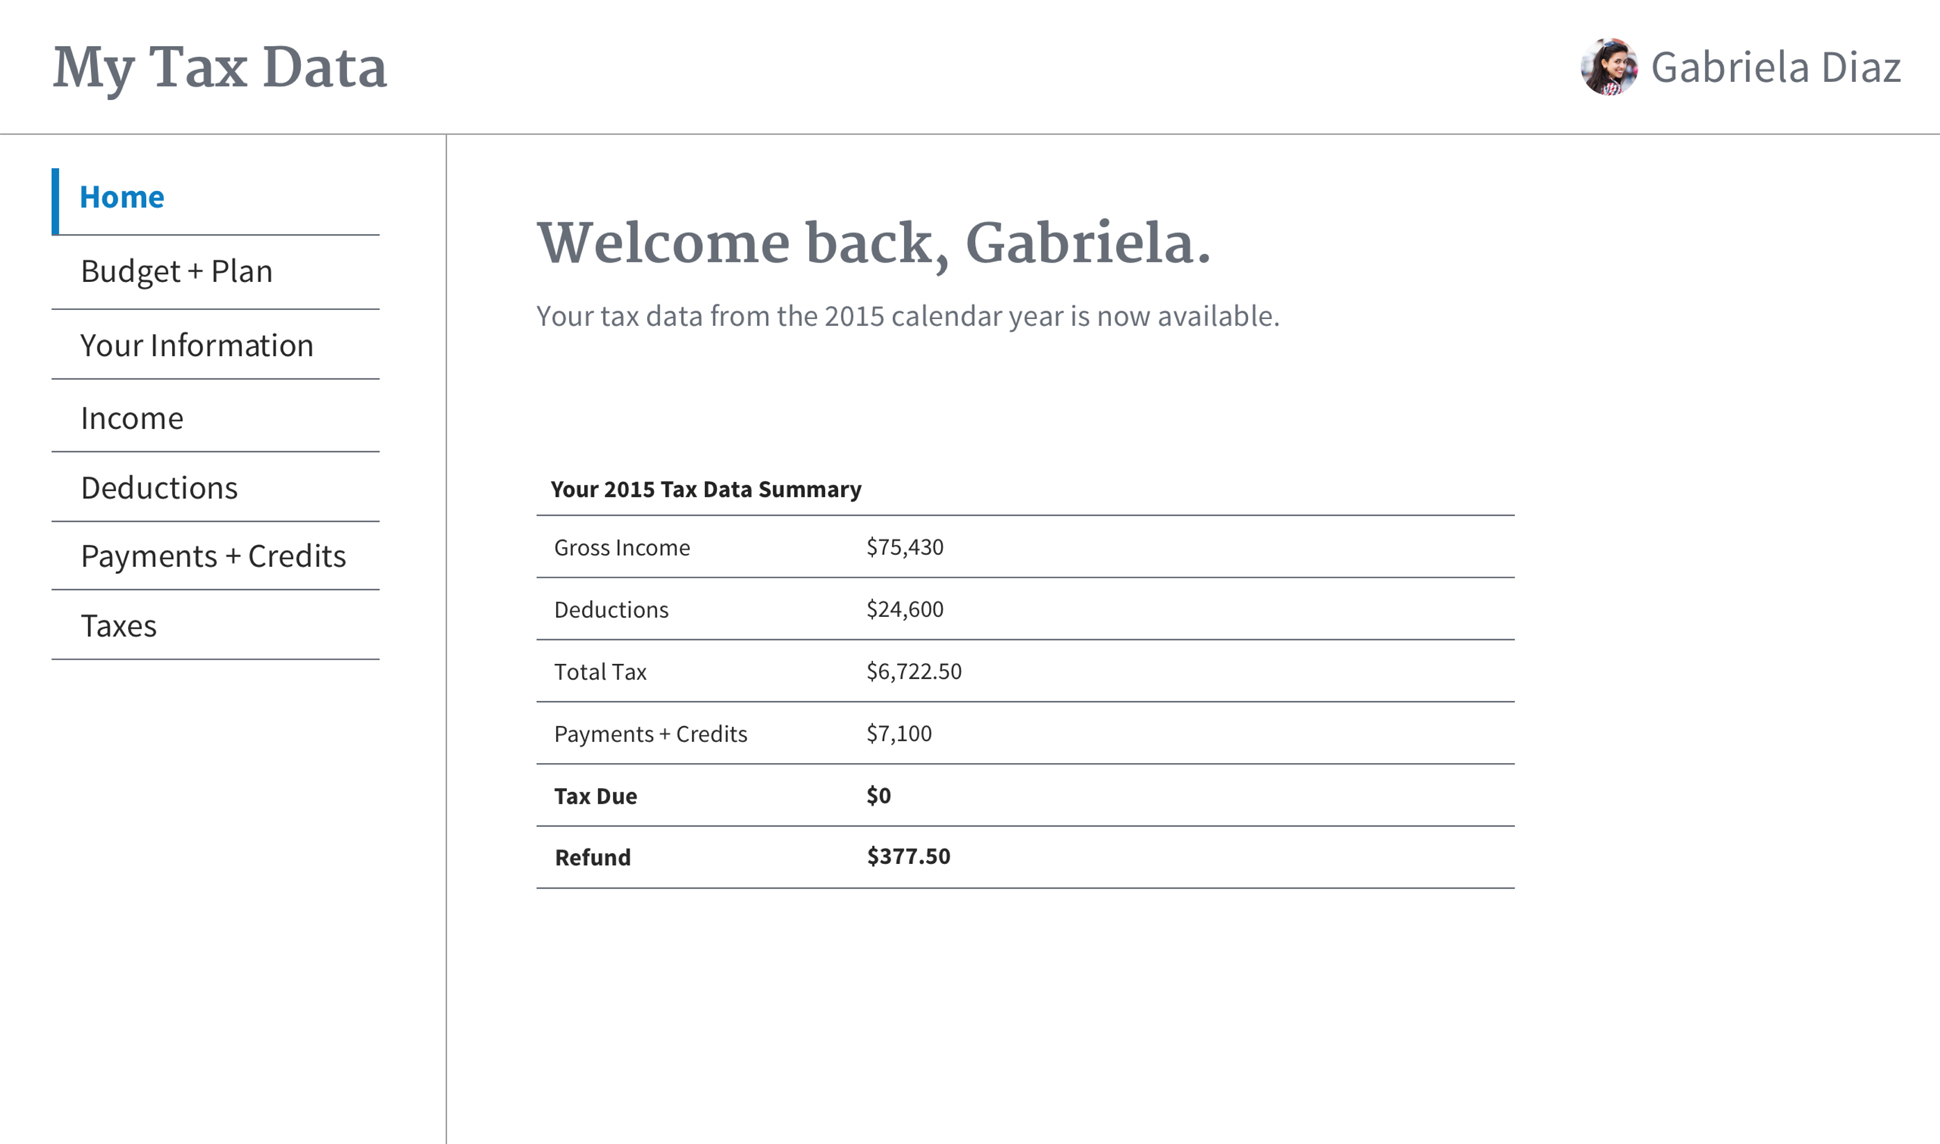 A page from a tax design challenge submission. A dashboard screen welcomes back the user, Gabriela. She can also see her tax data summary.